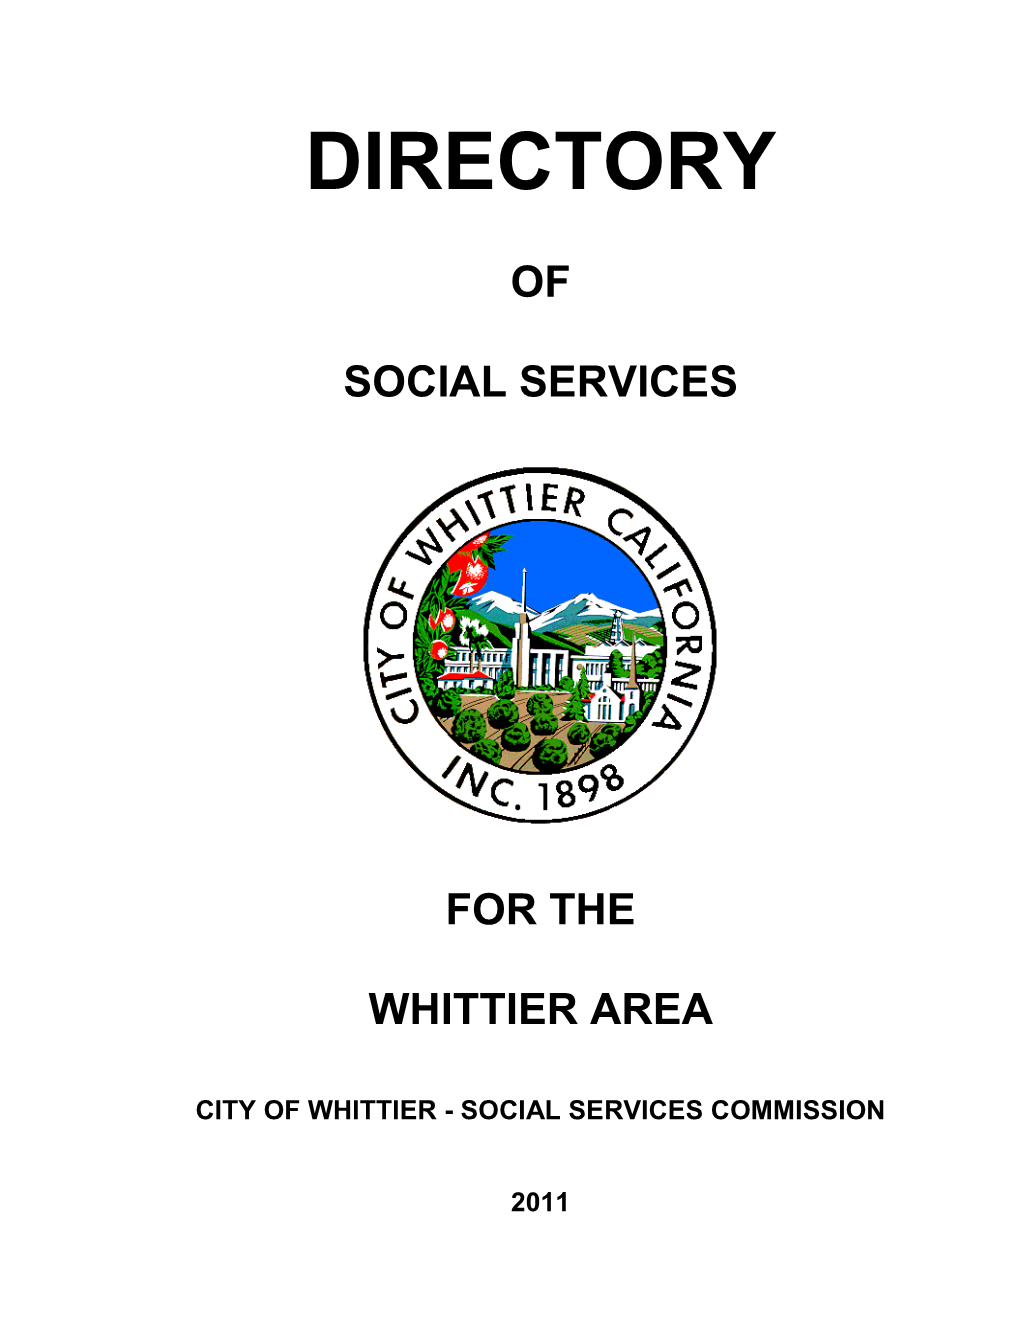 Directory of Social Services and Youth Service Agencies for the Whittier Area